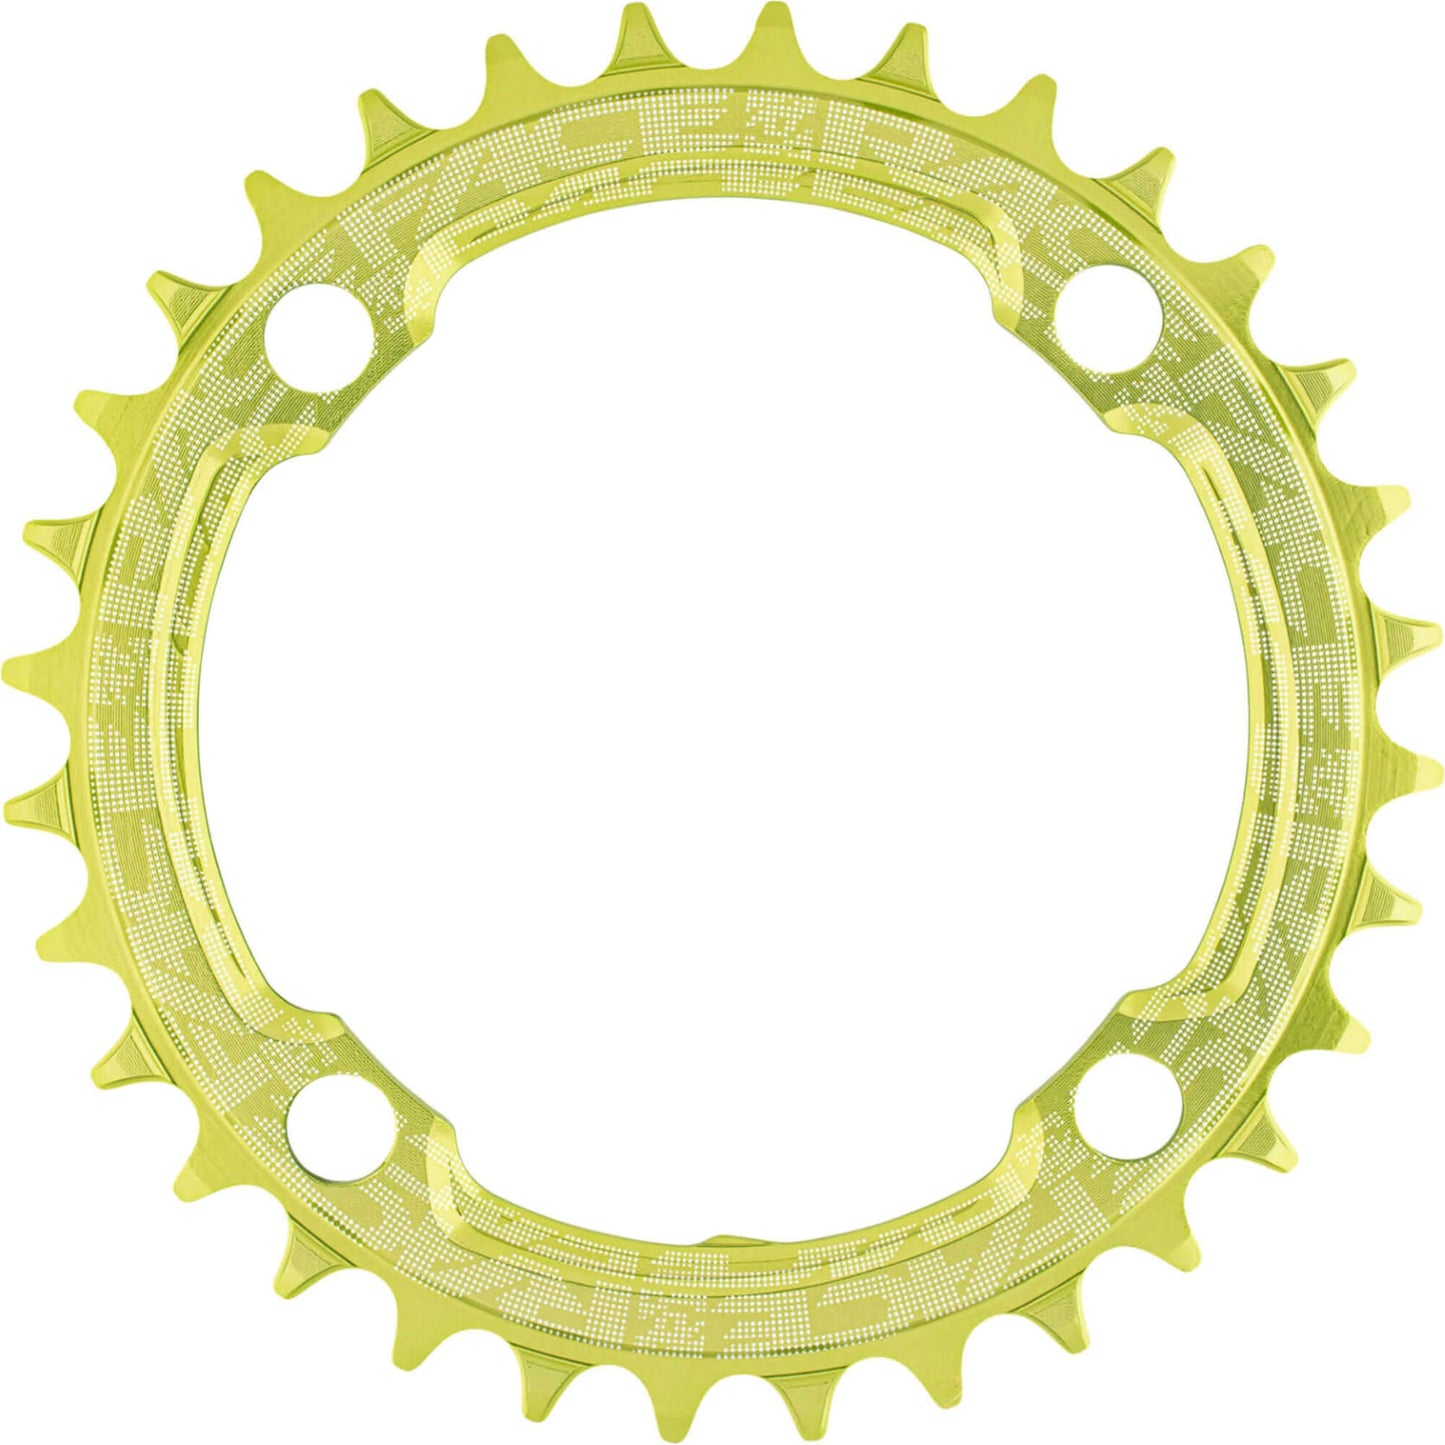 Race Face Narrow/Wide Single Chainring - 4 bolt / 104 BCD - 32T